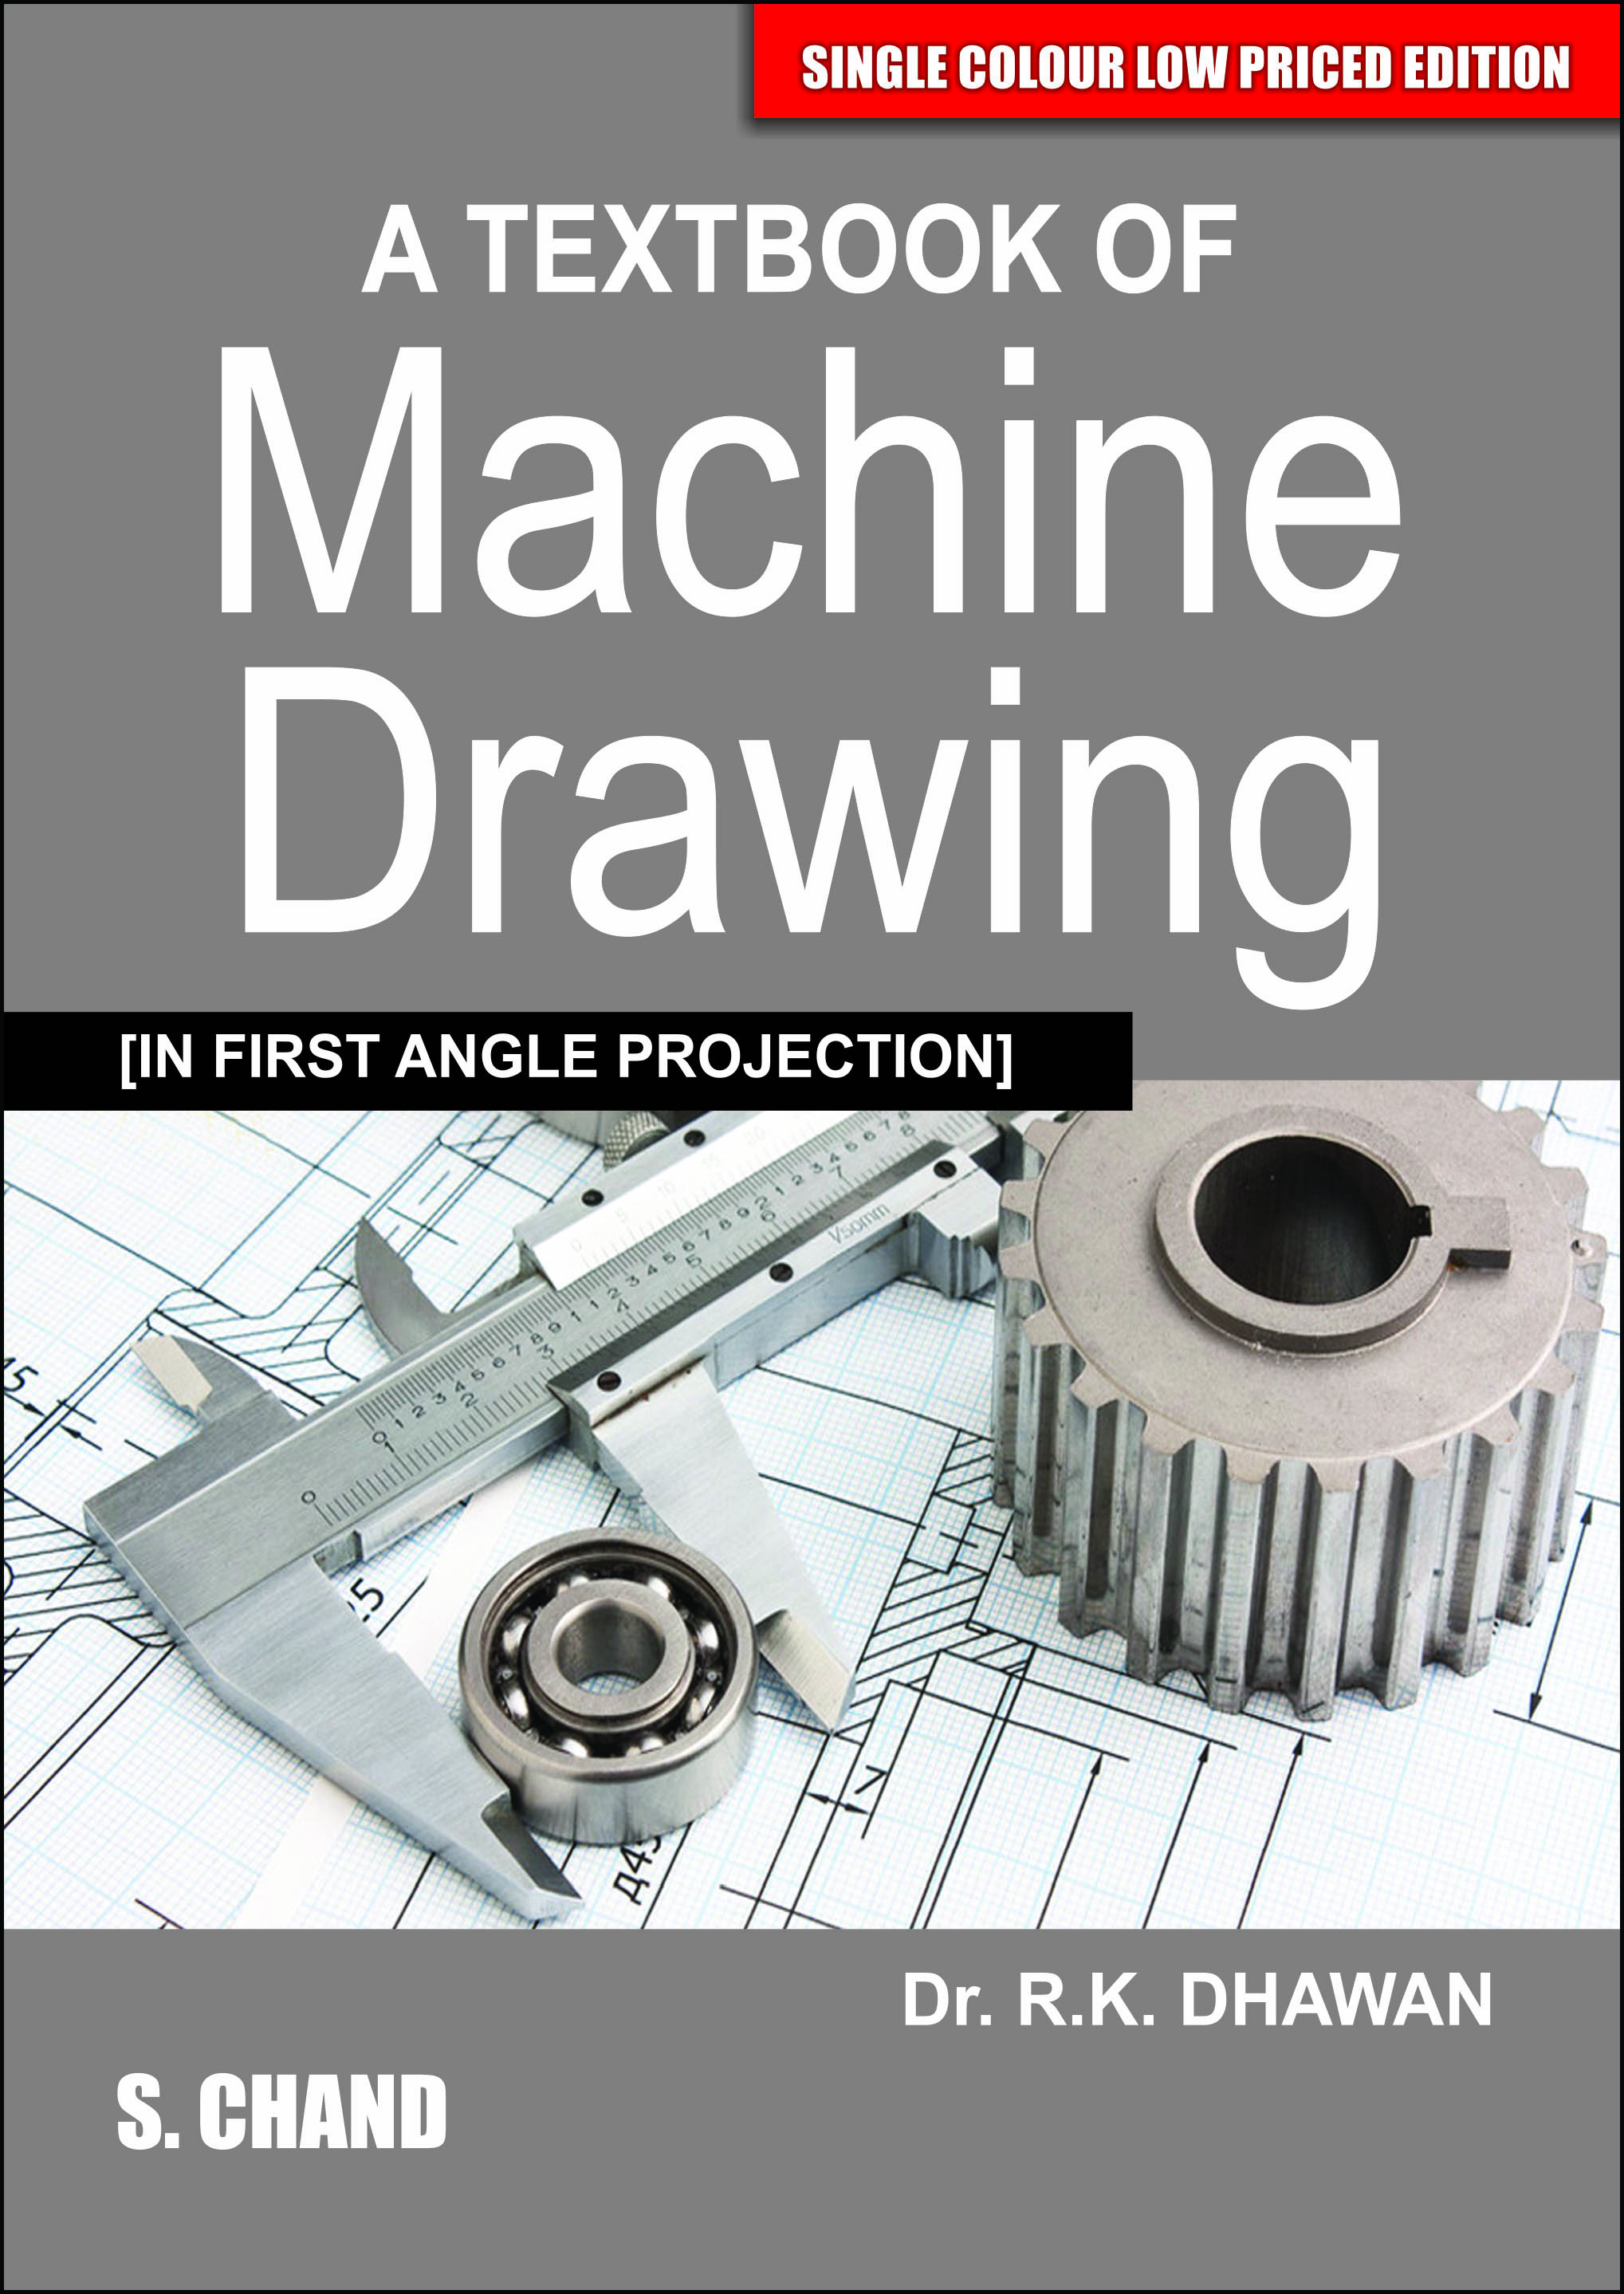 A TEXTBOOK OF MACHINE DRAWING